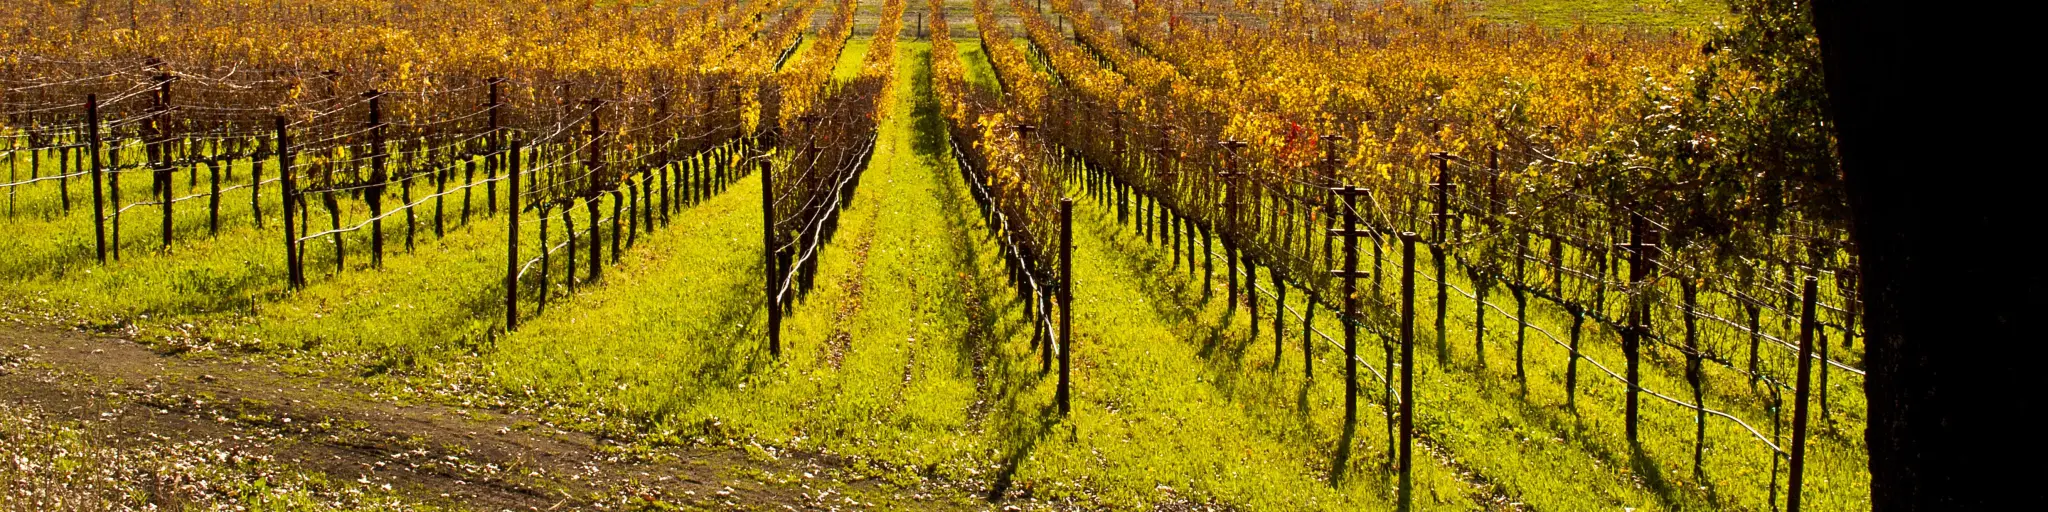 Autumn view of a vineyard in Napa Valley, part of the image is framed by a tree in the foregound